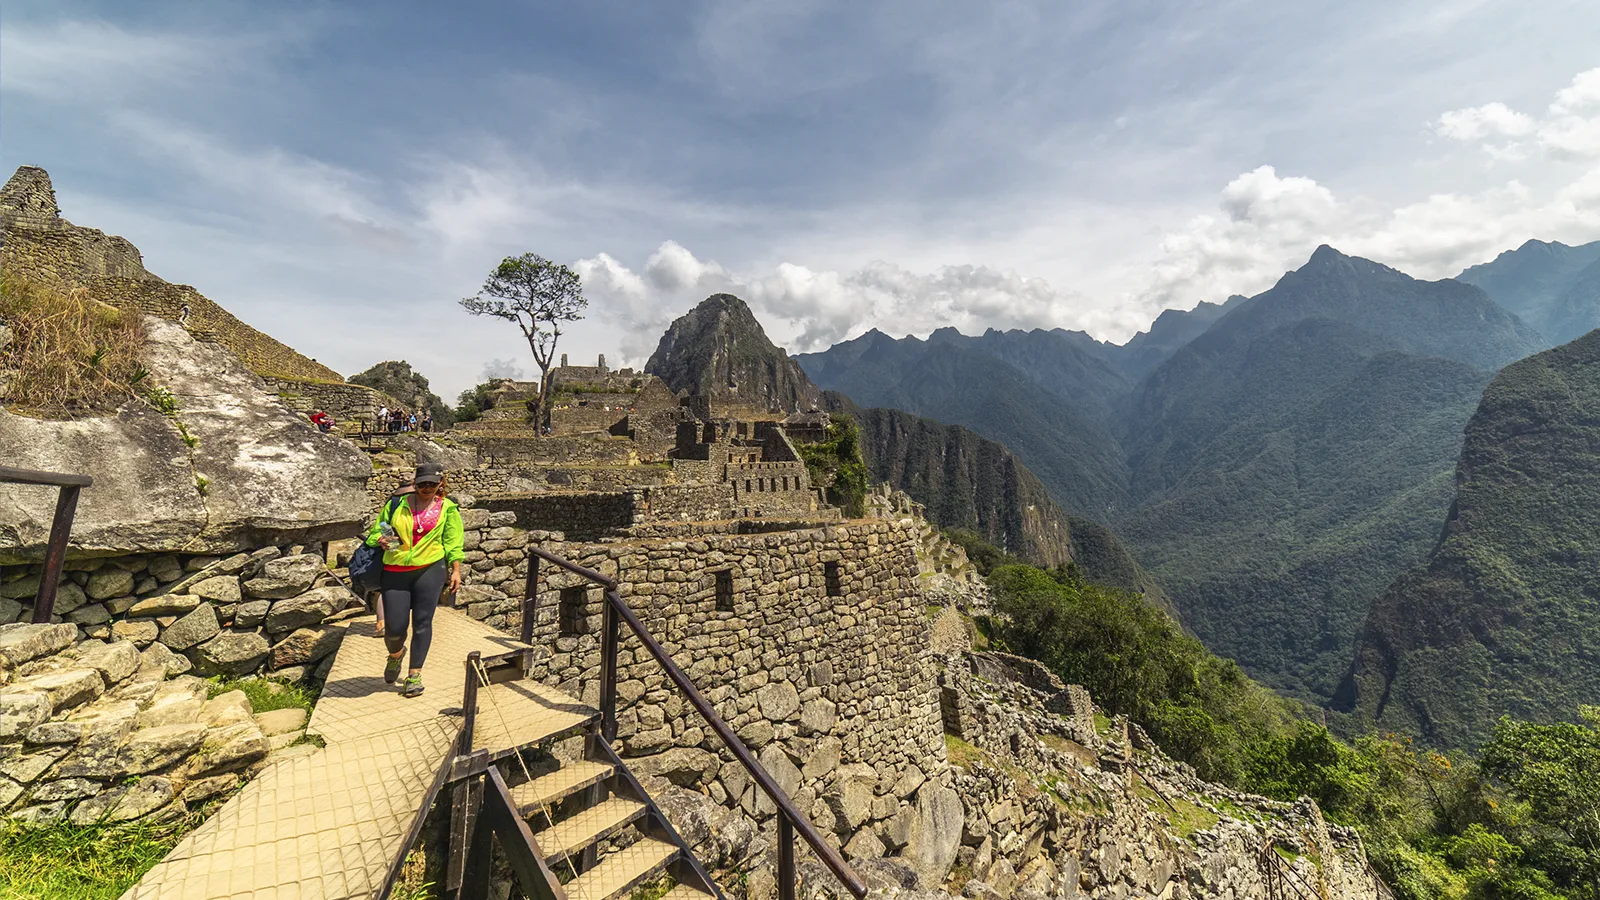 The circuits allow for smooth transit within the citadel of Machu Picchu.